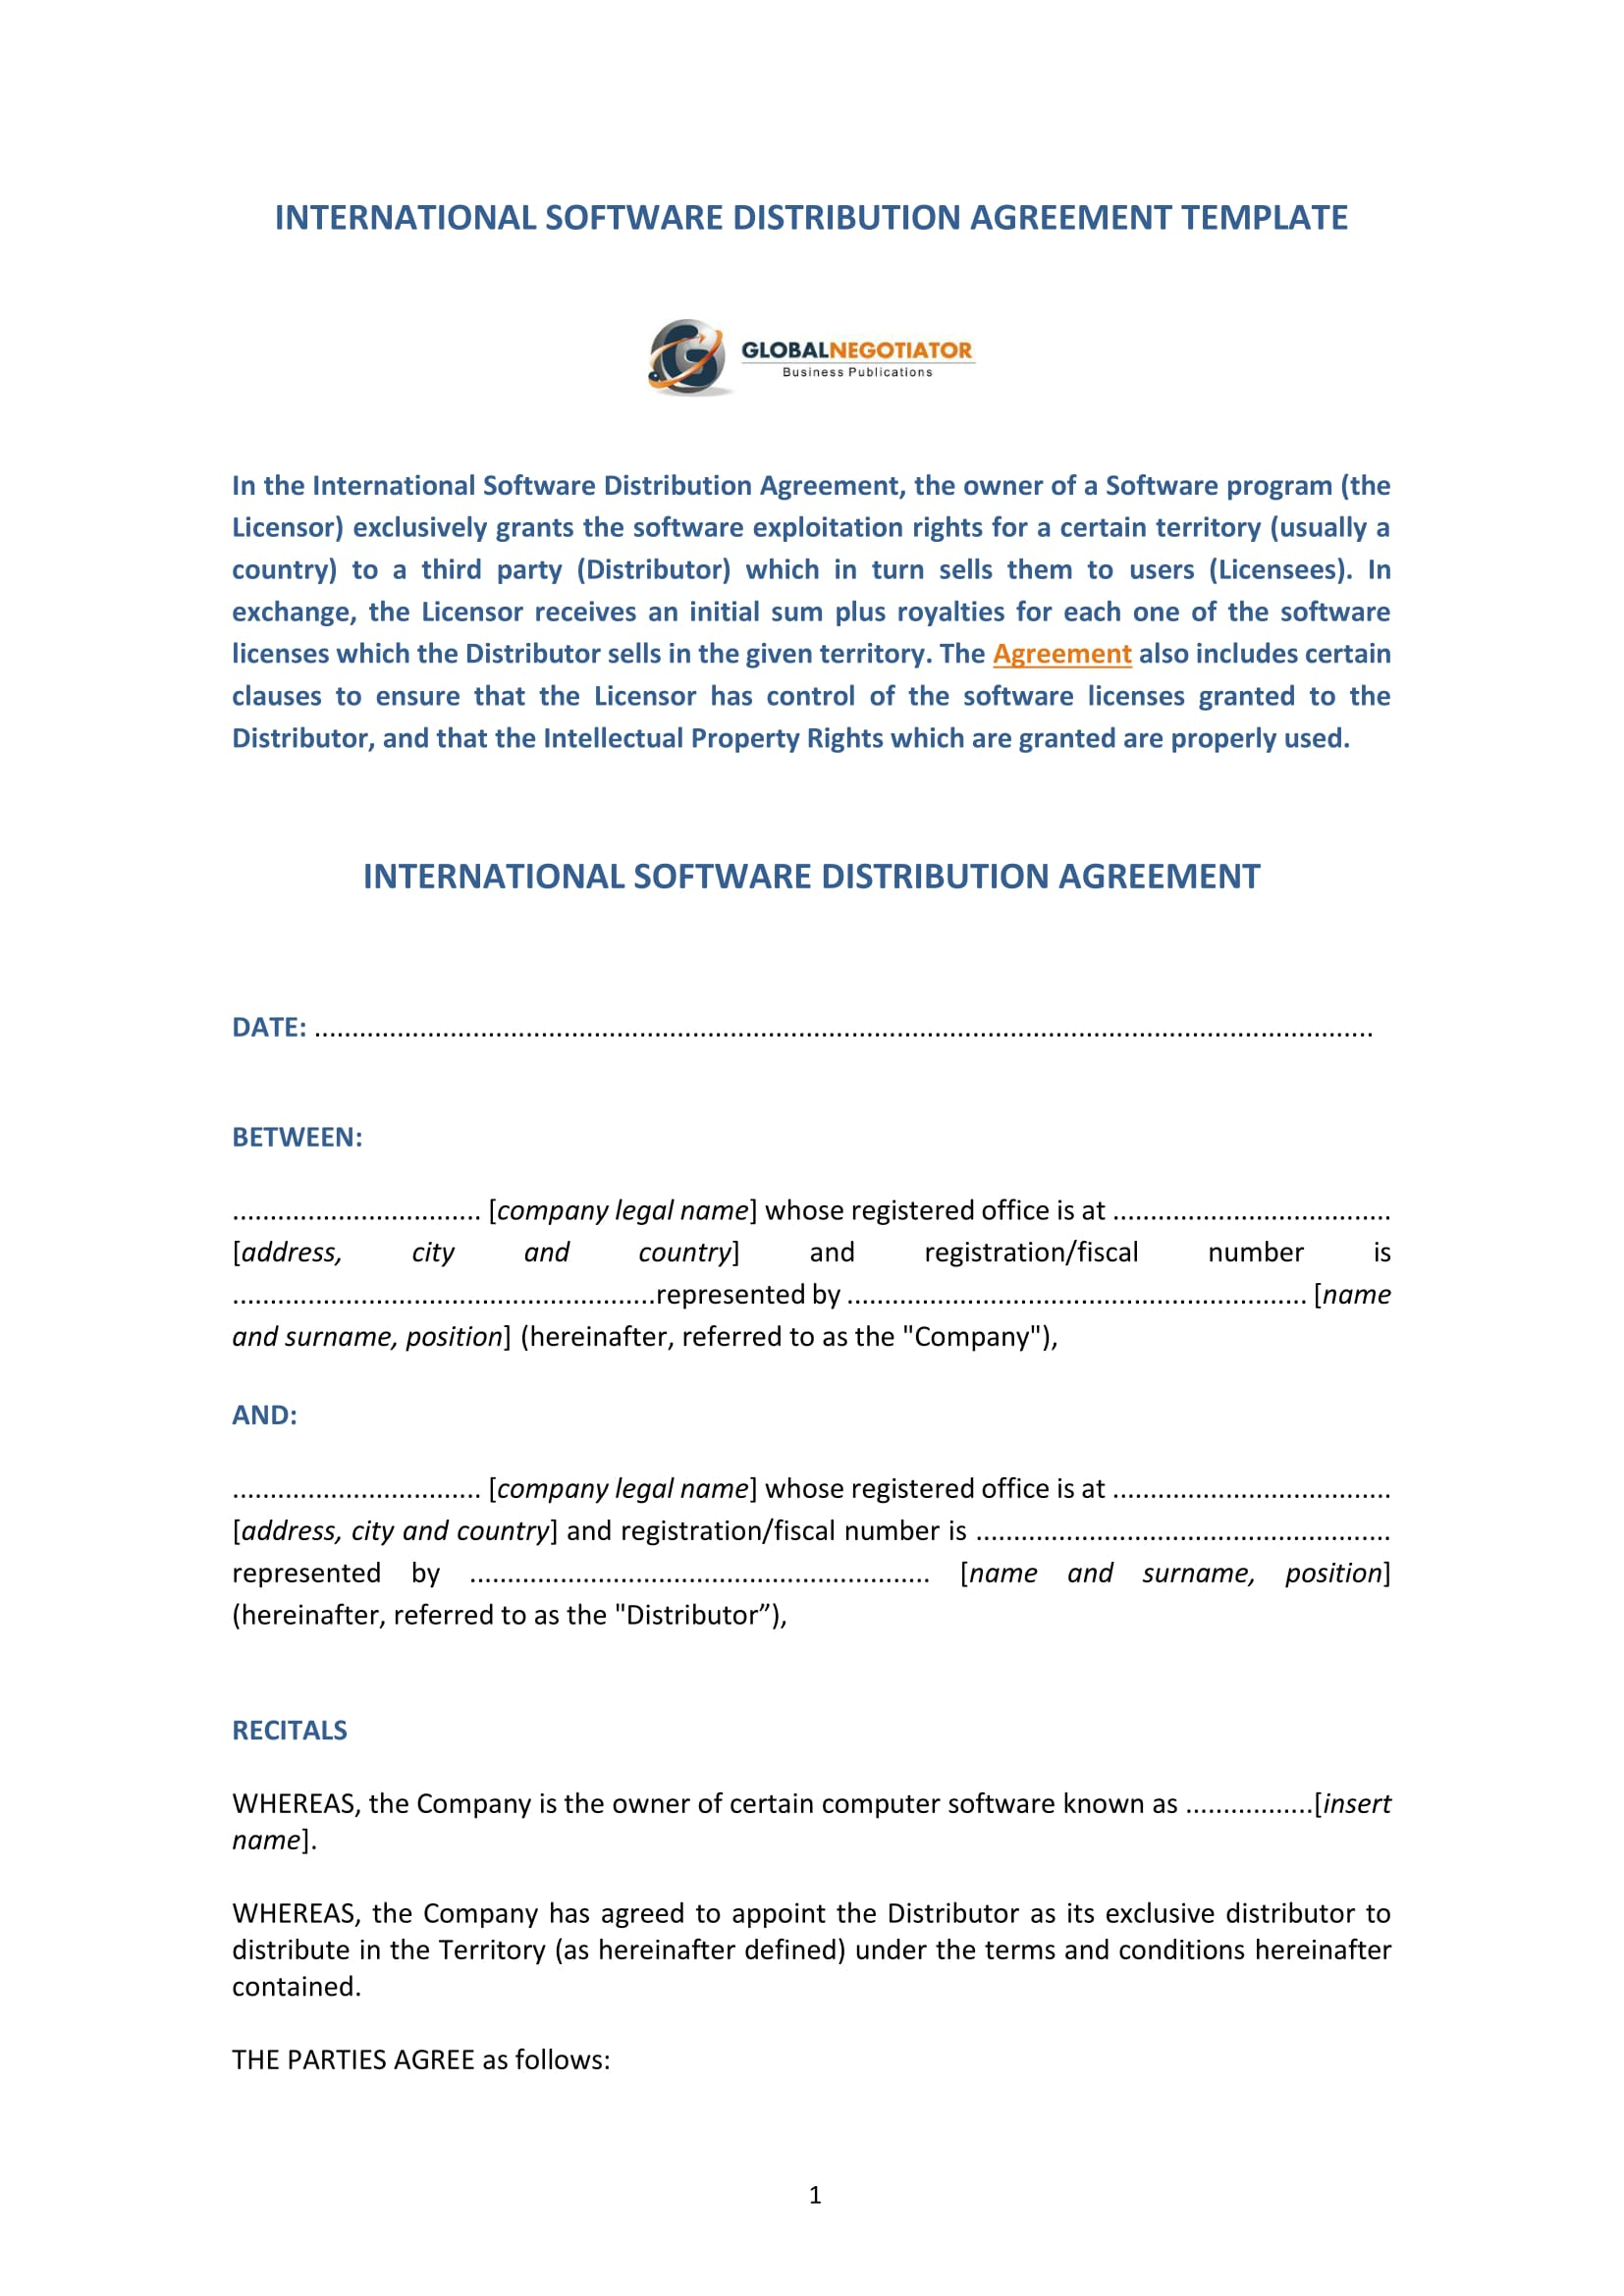 Distributor Agreement Sample Contract 4 Software Distribution Agreement Forms Pdf Word